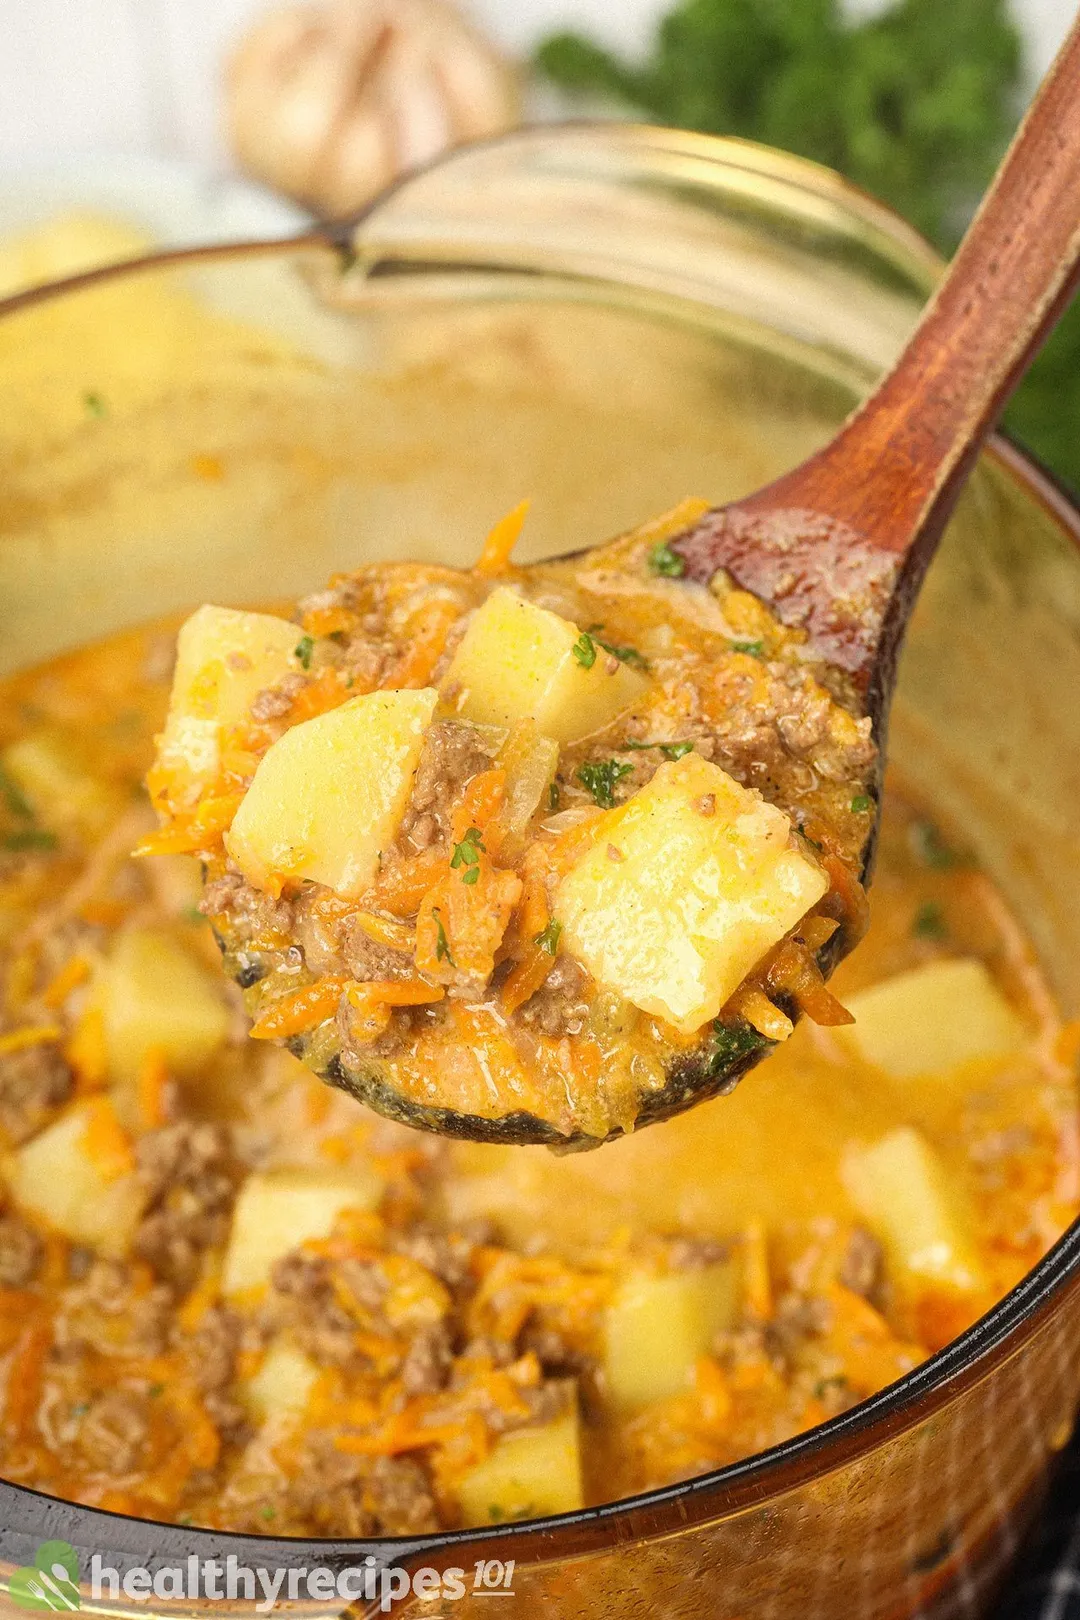 A wooden ladle filled with cooked potato cubes, julienned carrots, and ground beef held over a glass saucepan filled with cheeseburger soup